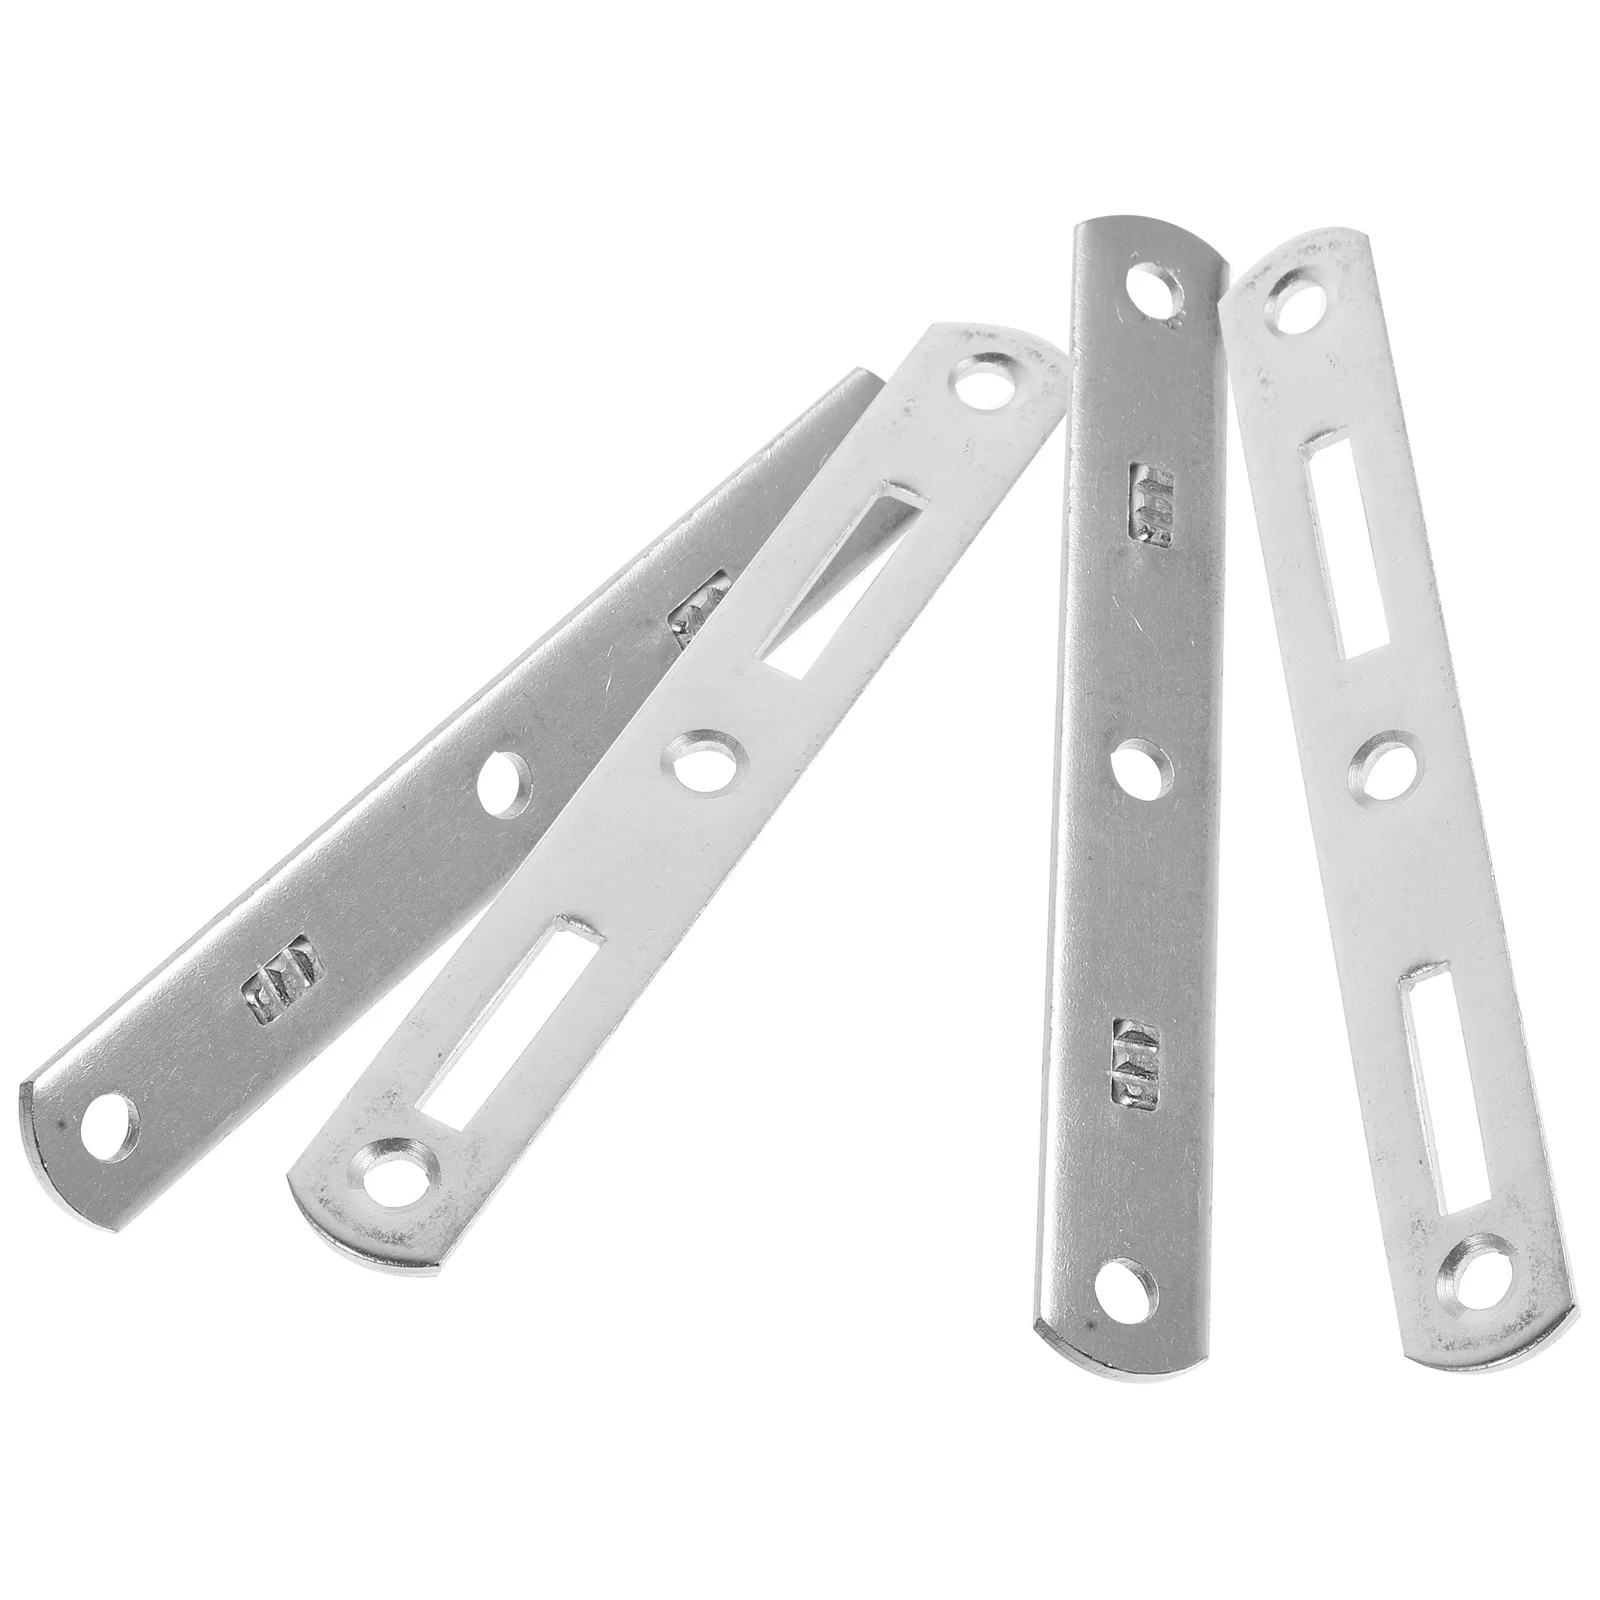 

4 Pcs Bed Hinge Hinged Accessories Queen Size Bedframe Hook Bed-rail Hardware Stainless Steel Hardwares Brackets